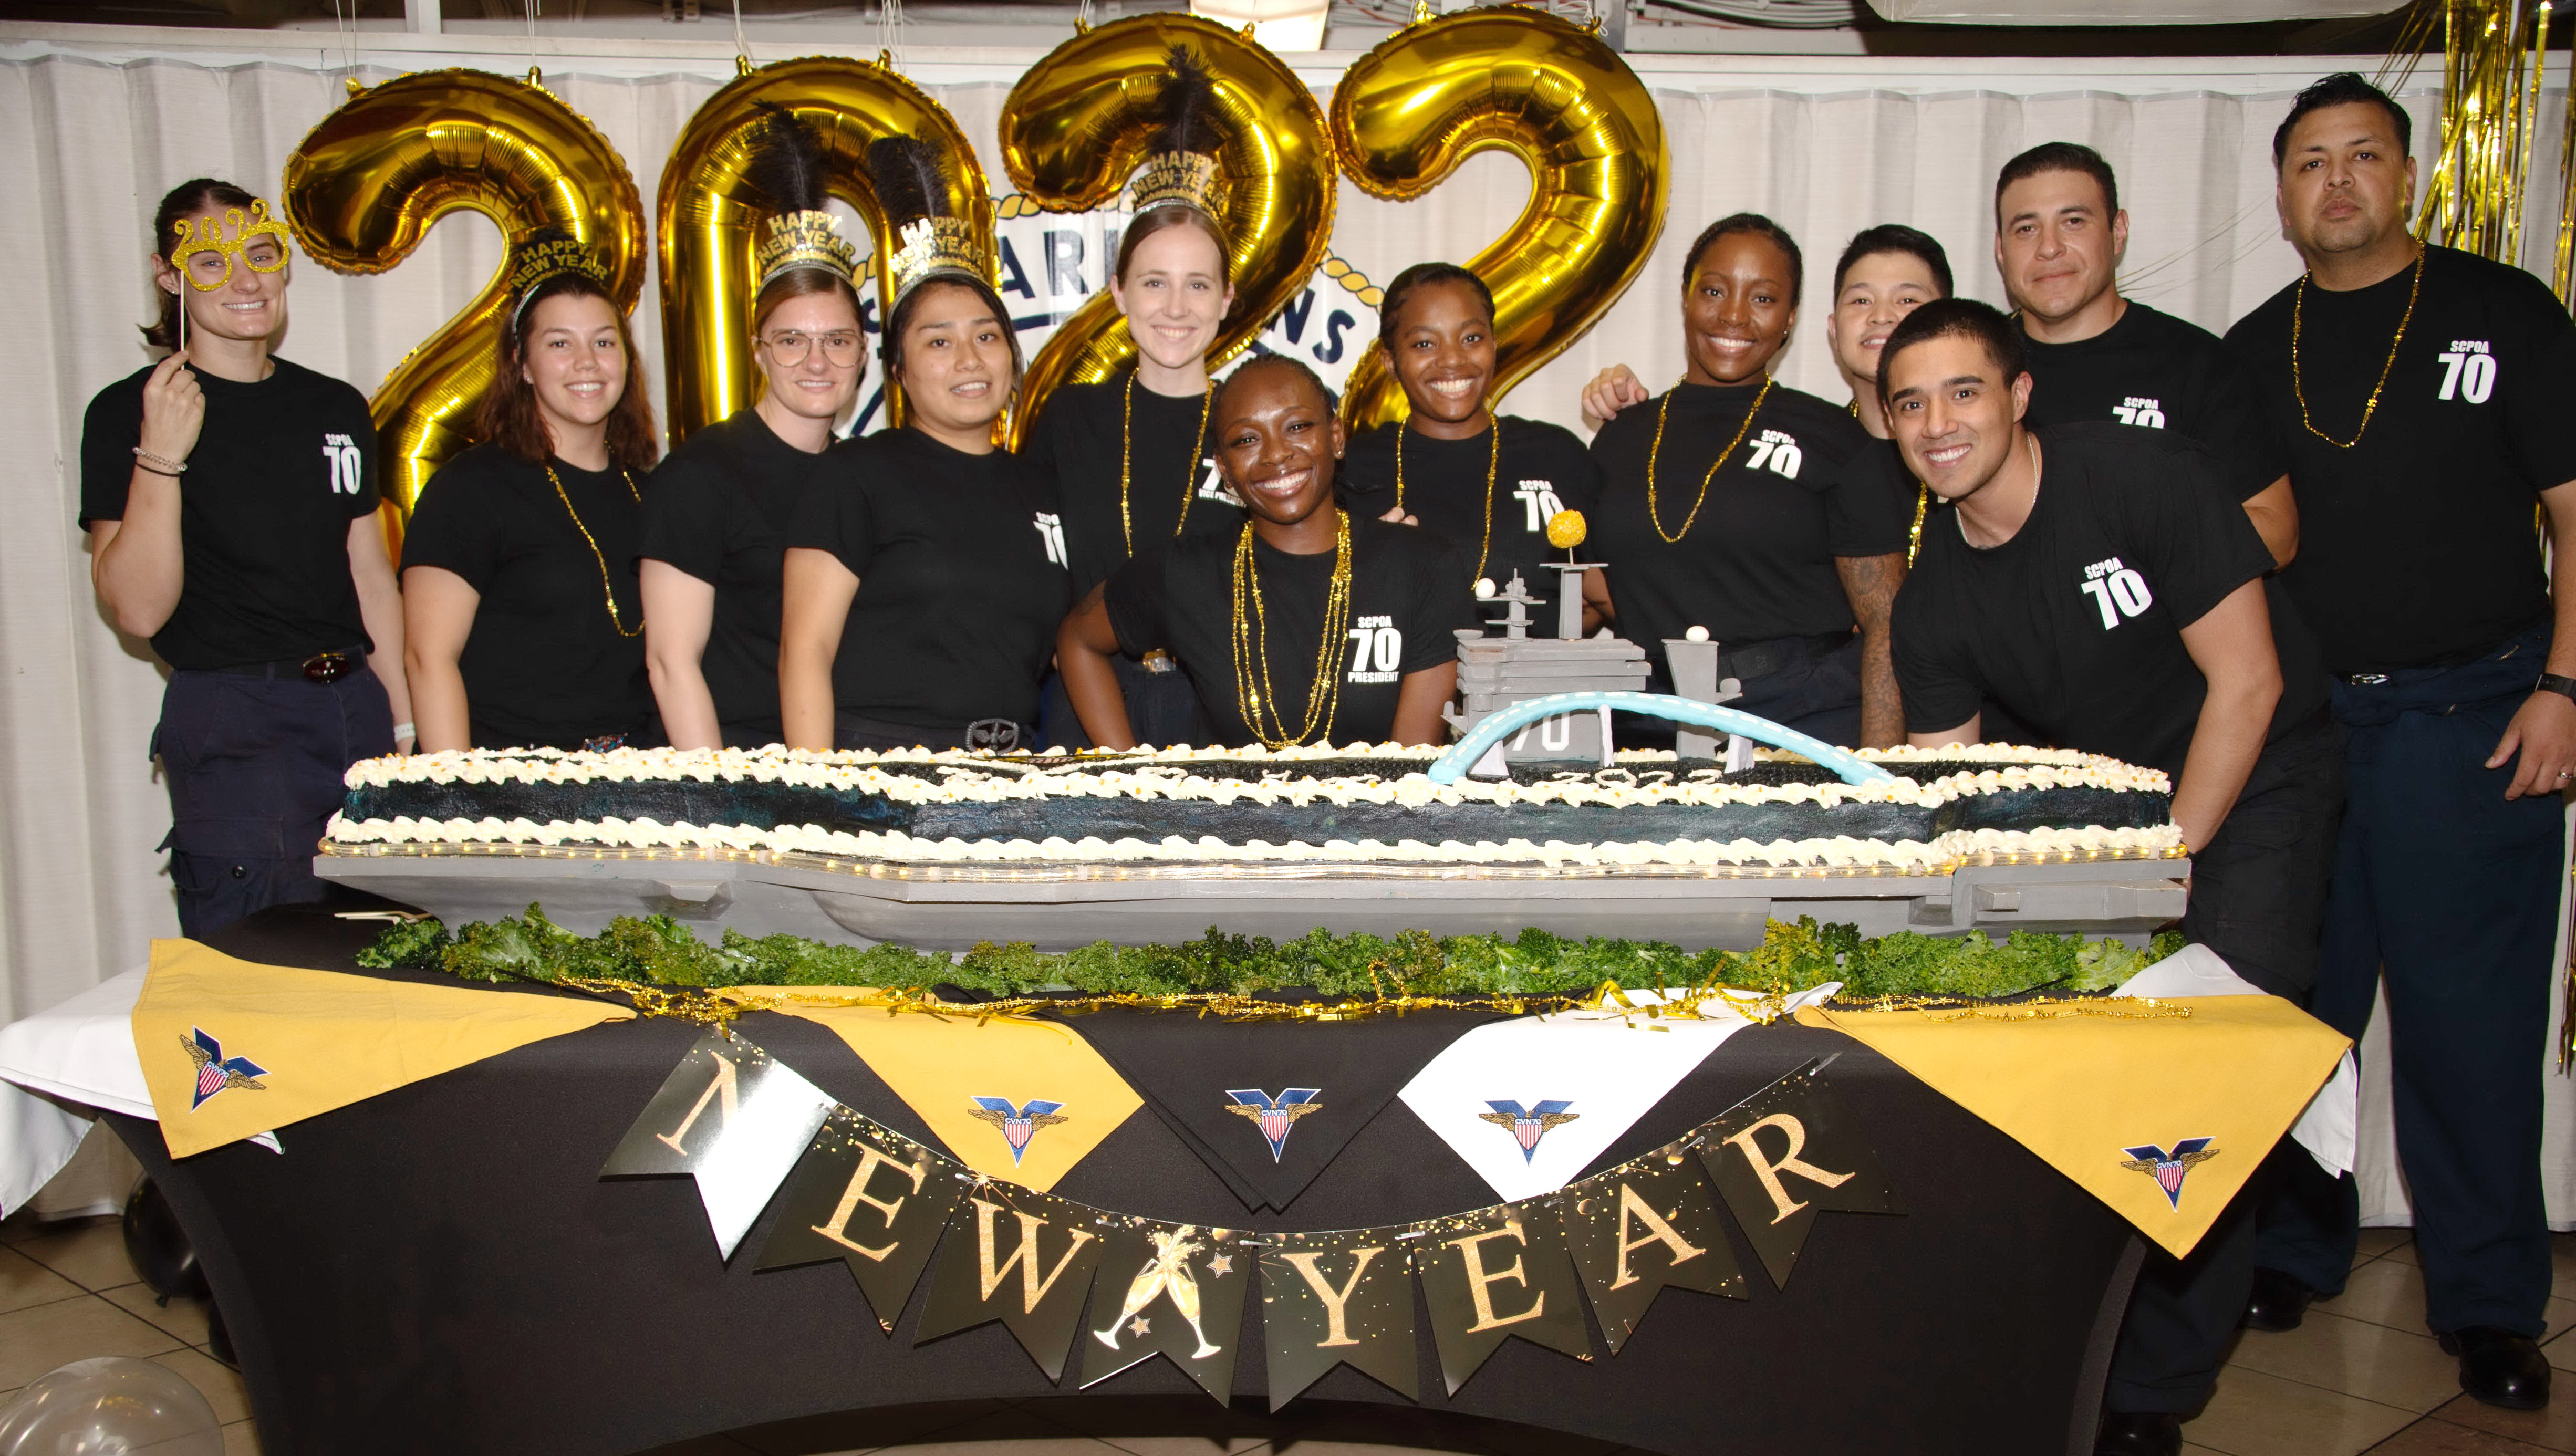 USS Carl Vinson (CVN 70), pose next to a cake in the mess deck during a New Year’s Eve event, Dec. 31, 2021.JPG